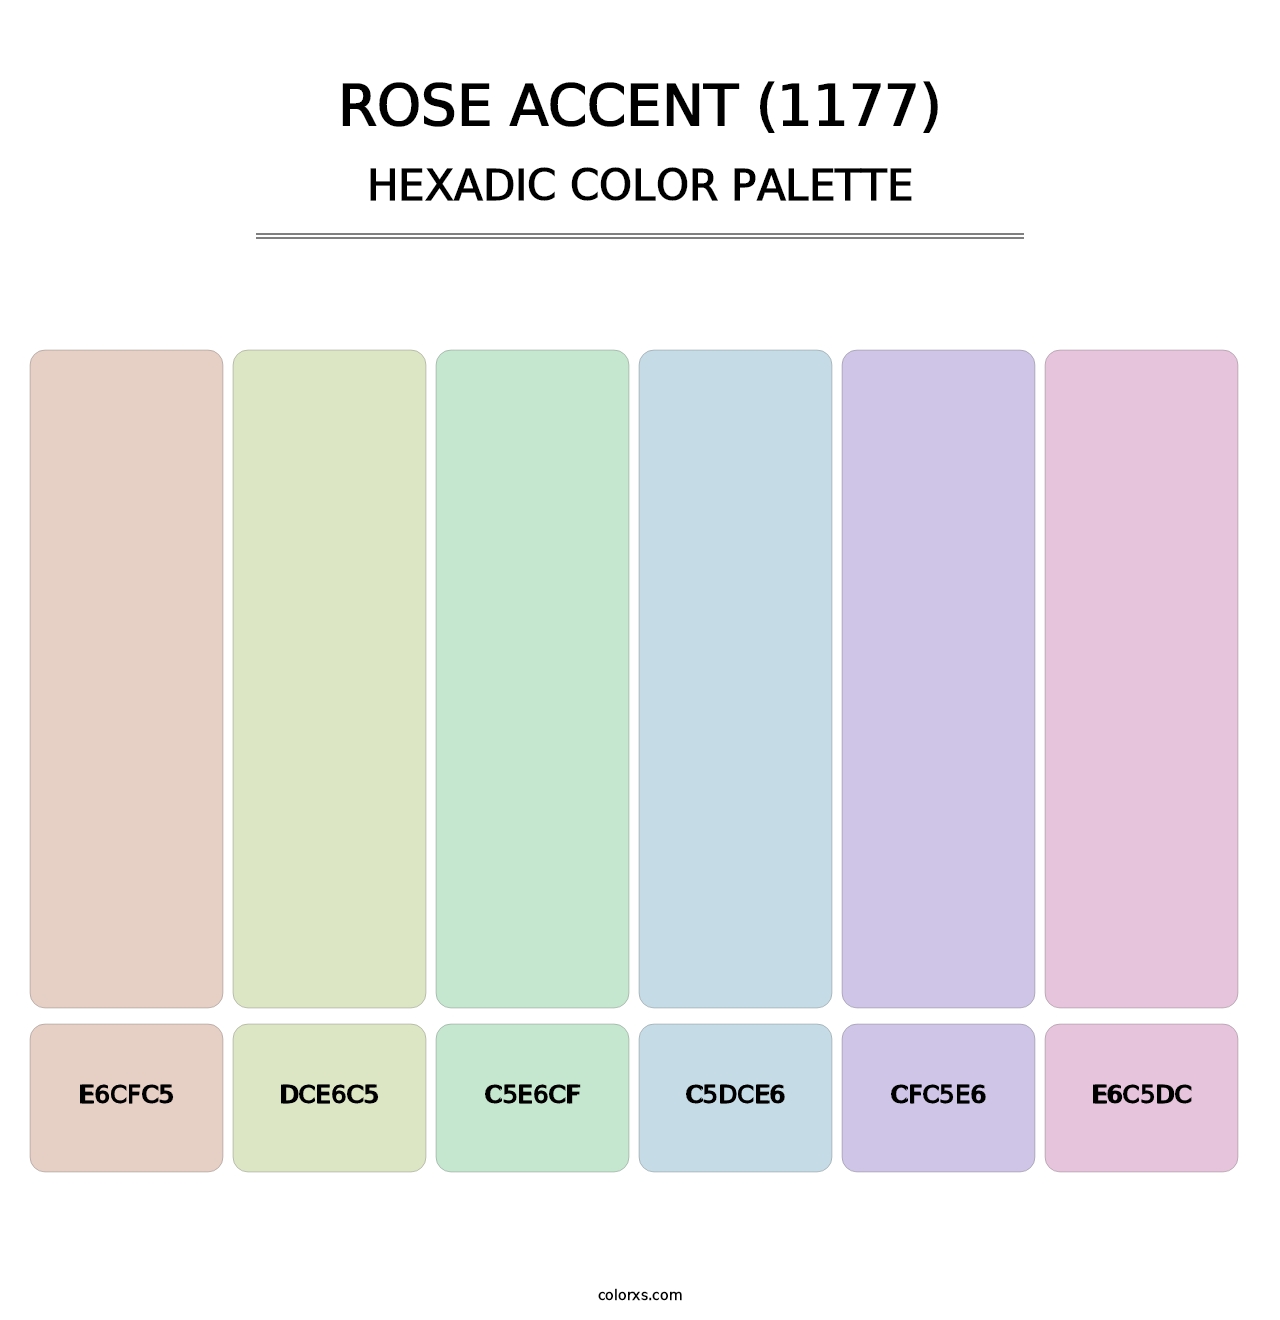 Rose Accent (1177) - Hexadic Color Palette